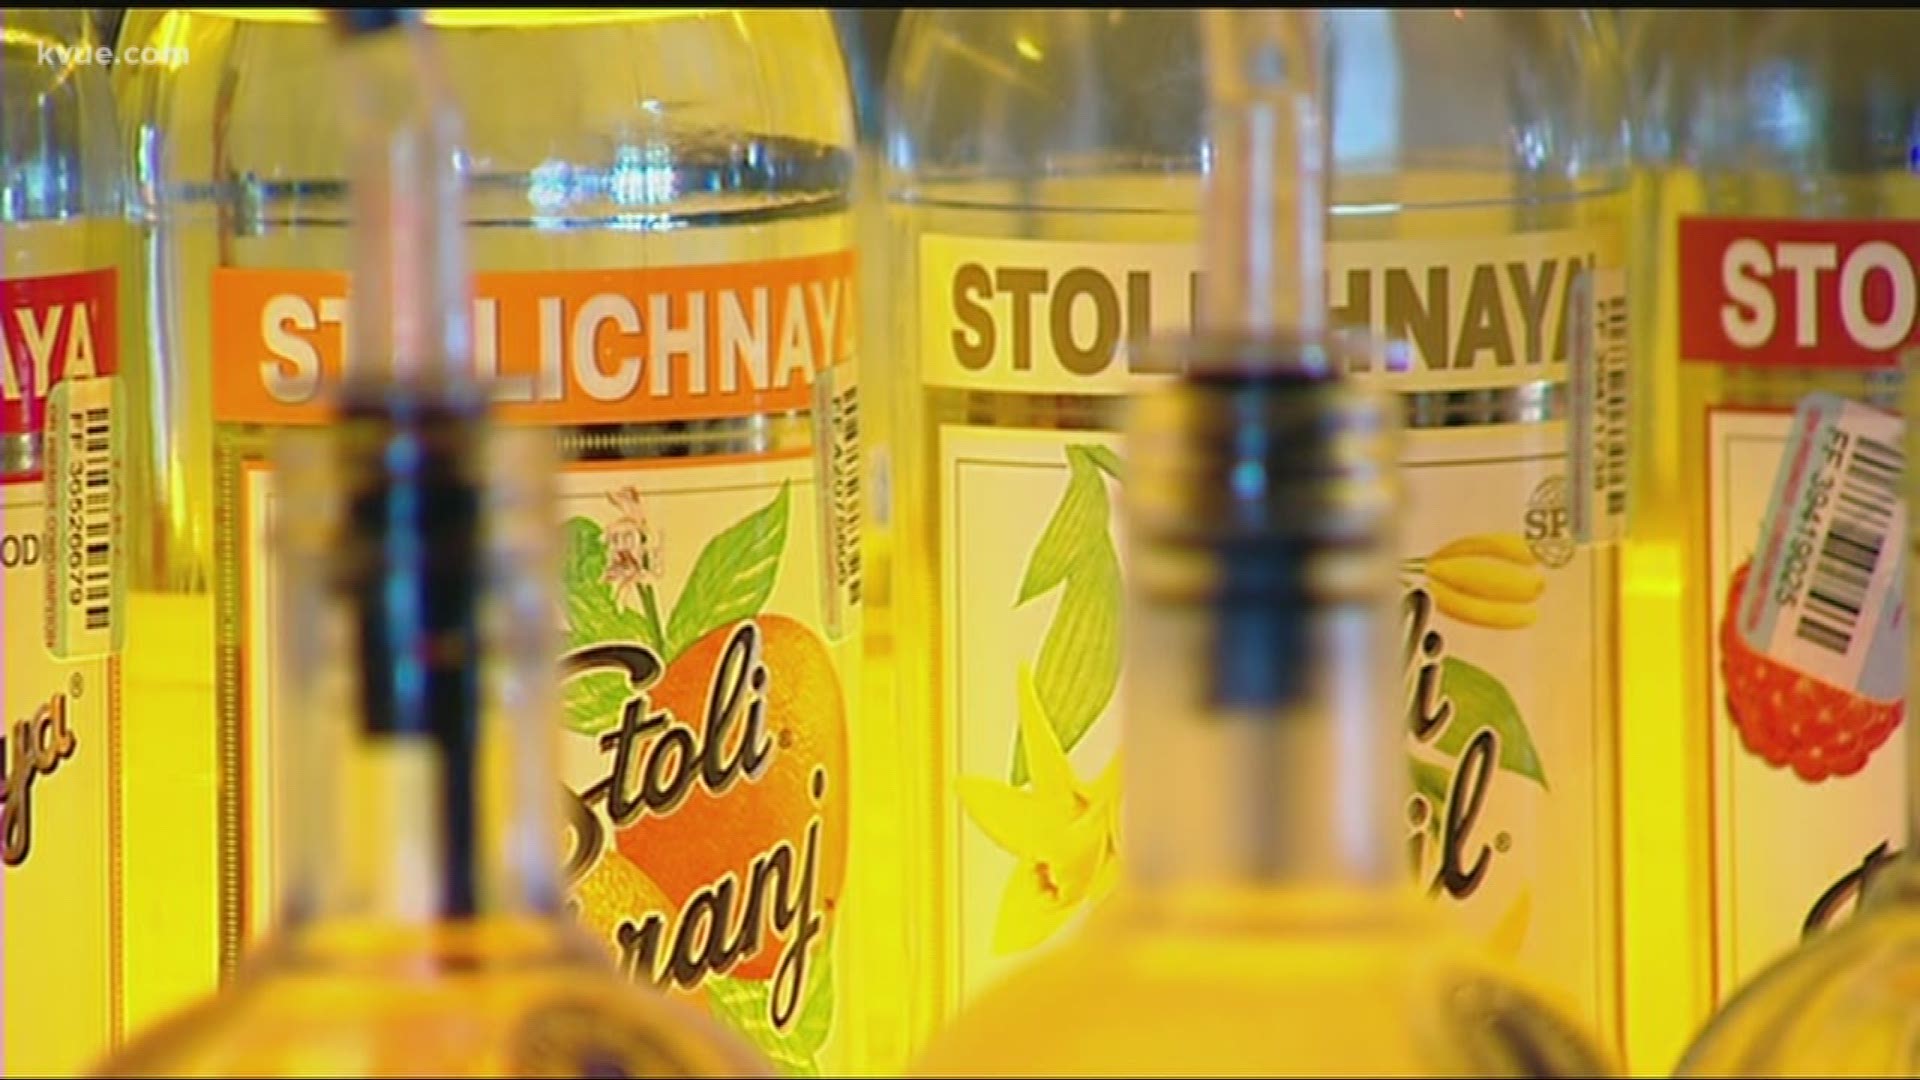 The Round Rock Chamber is pushing for a change in alcohol laws in the city. July 12, a vote by city council could make it become a reality.